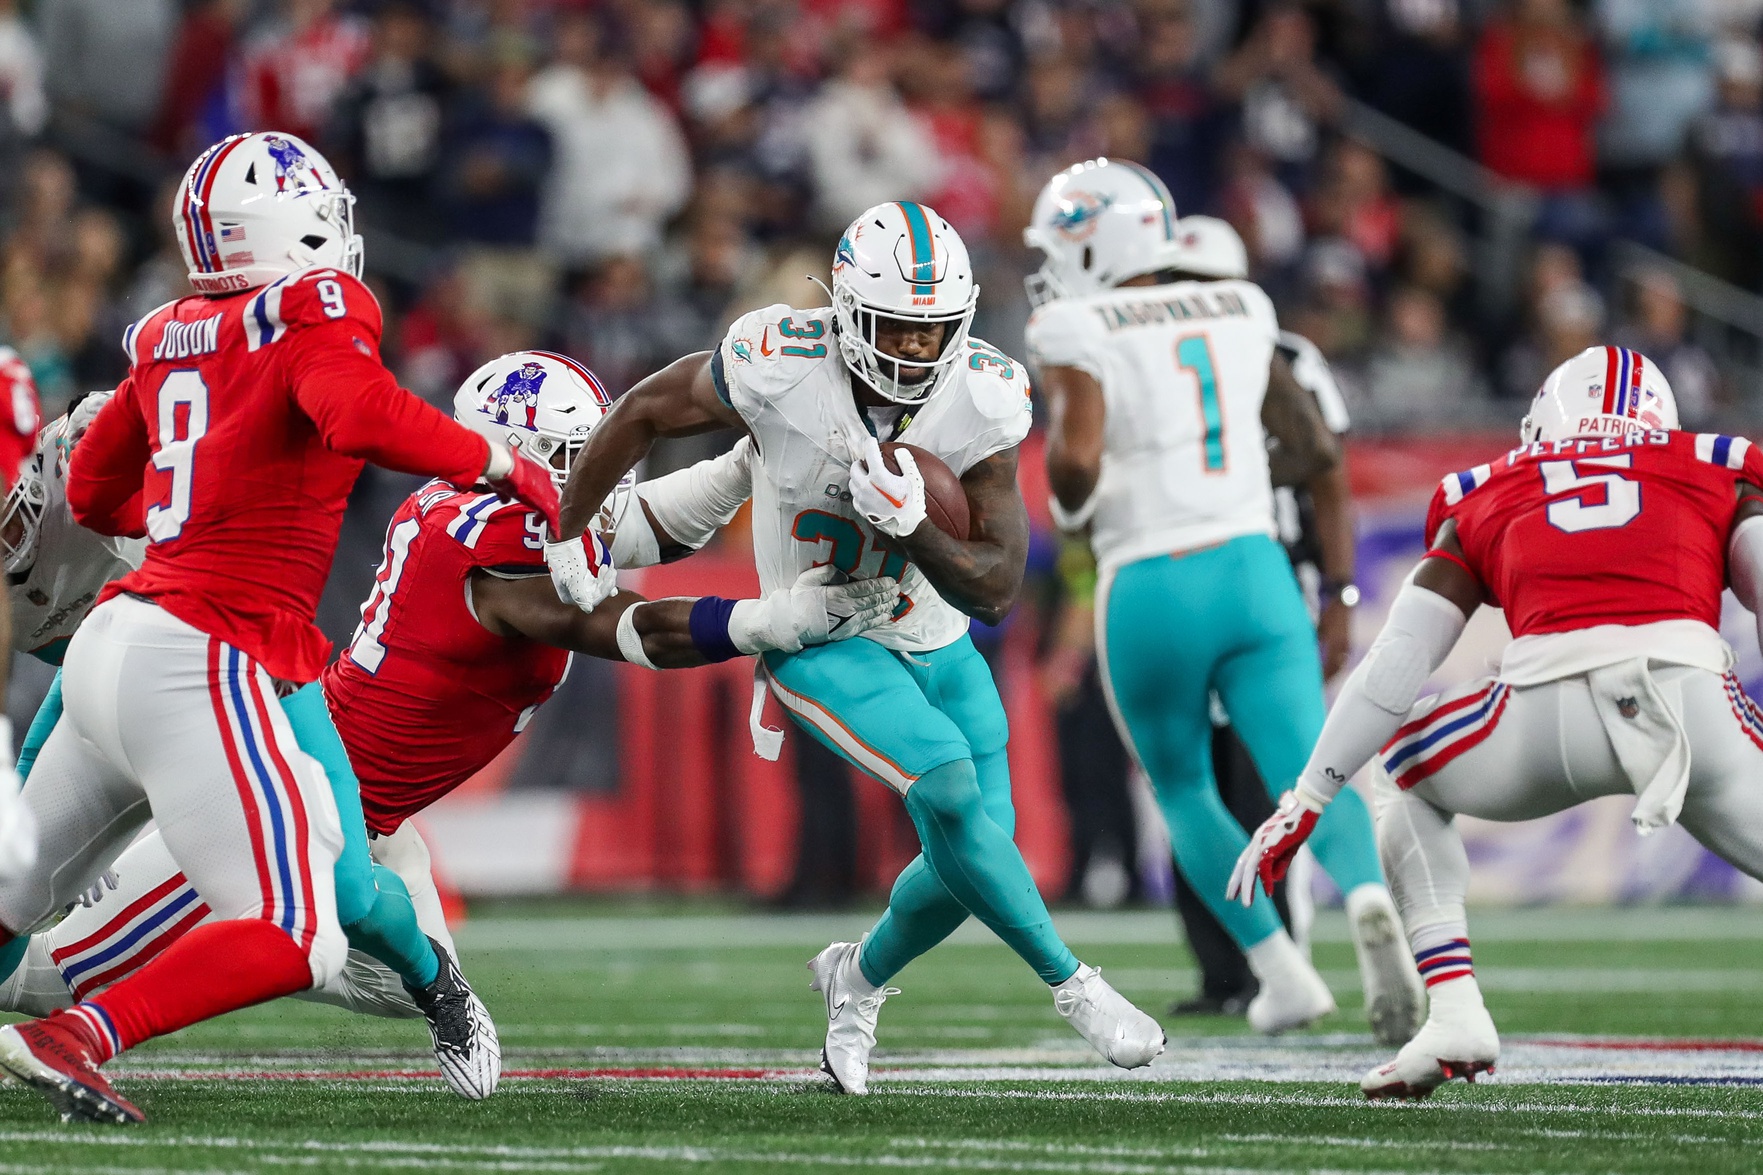 Miami Dolphins and Denver Broncos will not hold their NFL game next Sunday